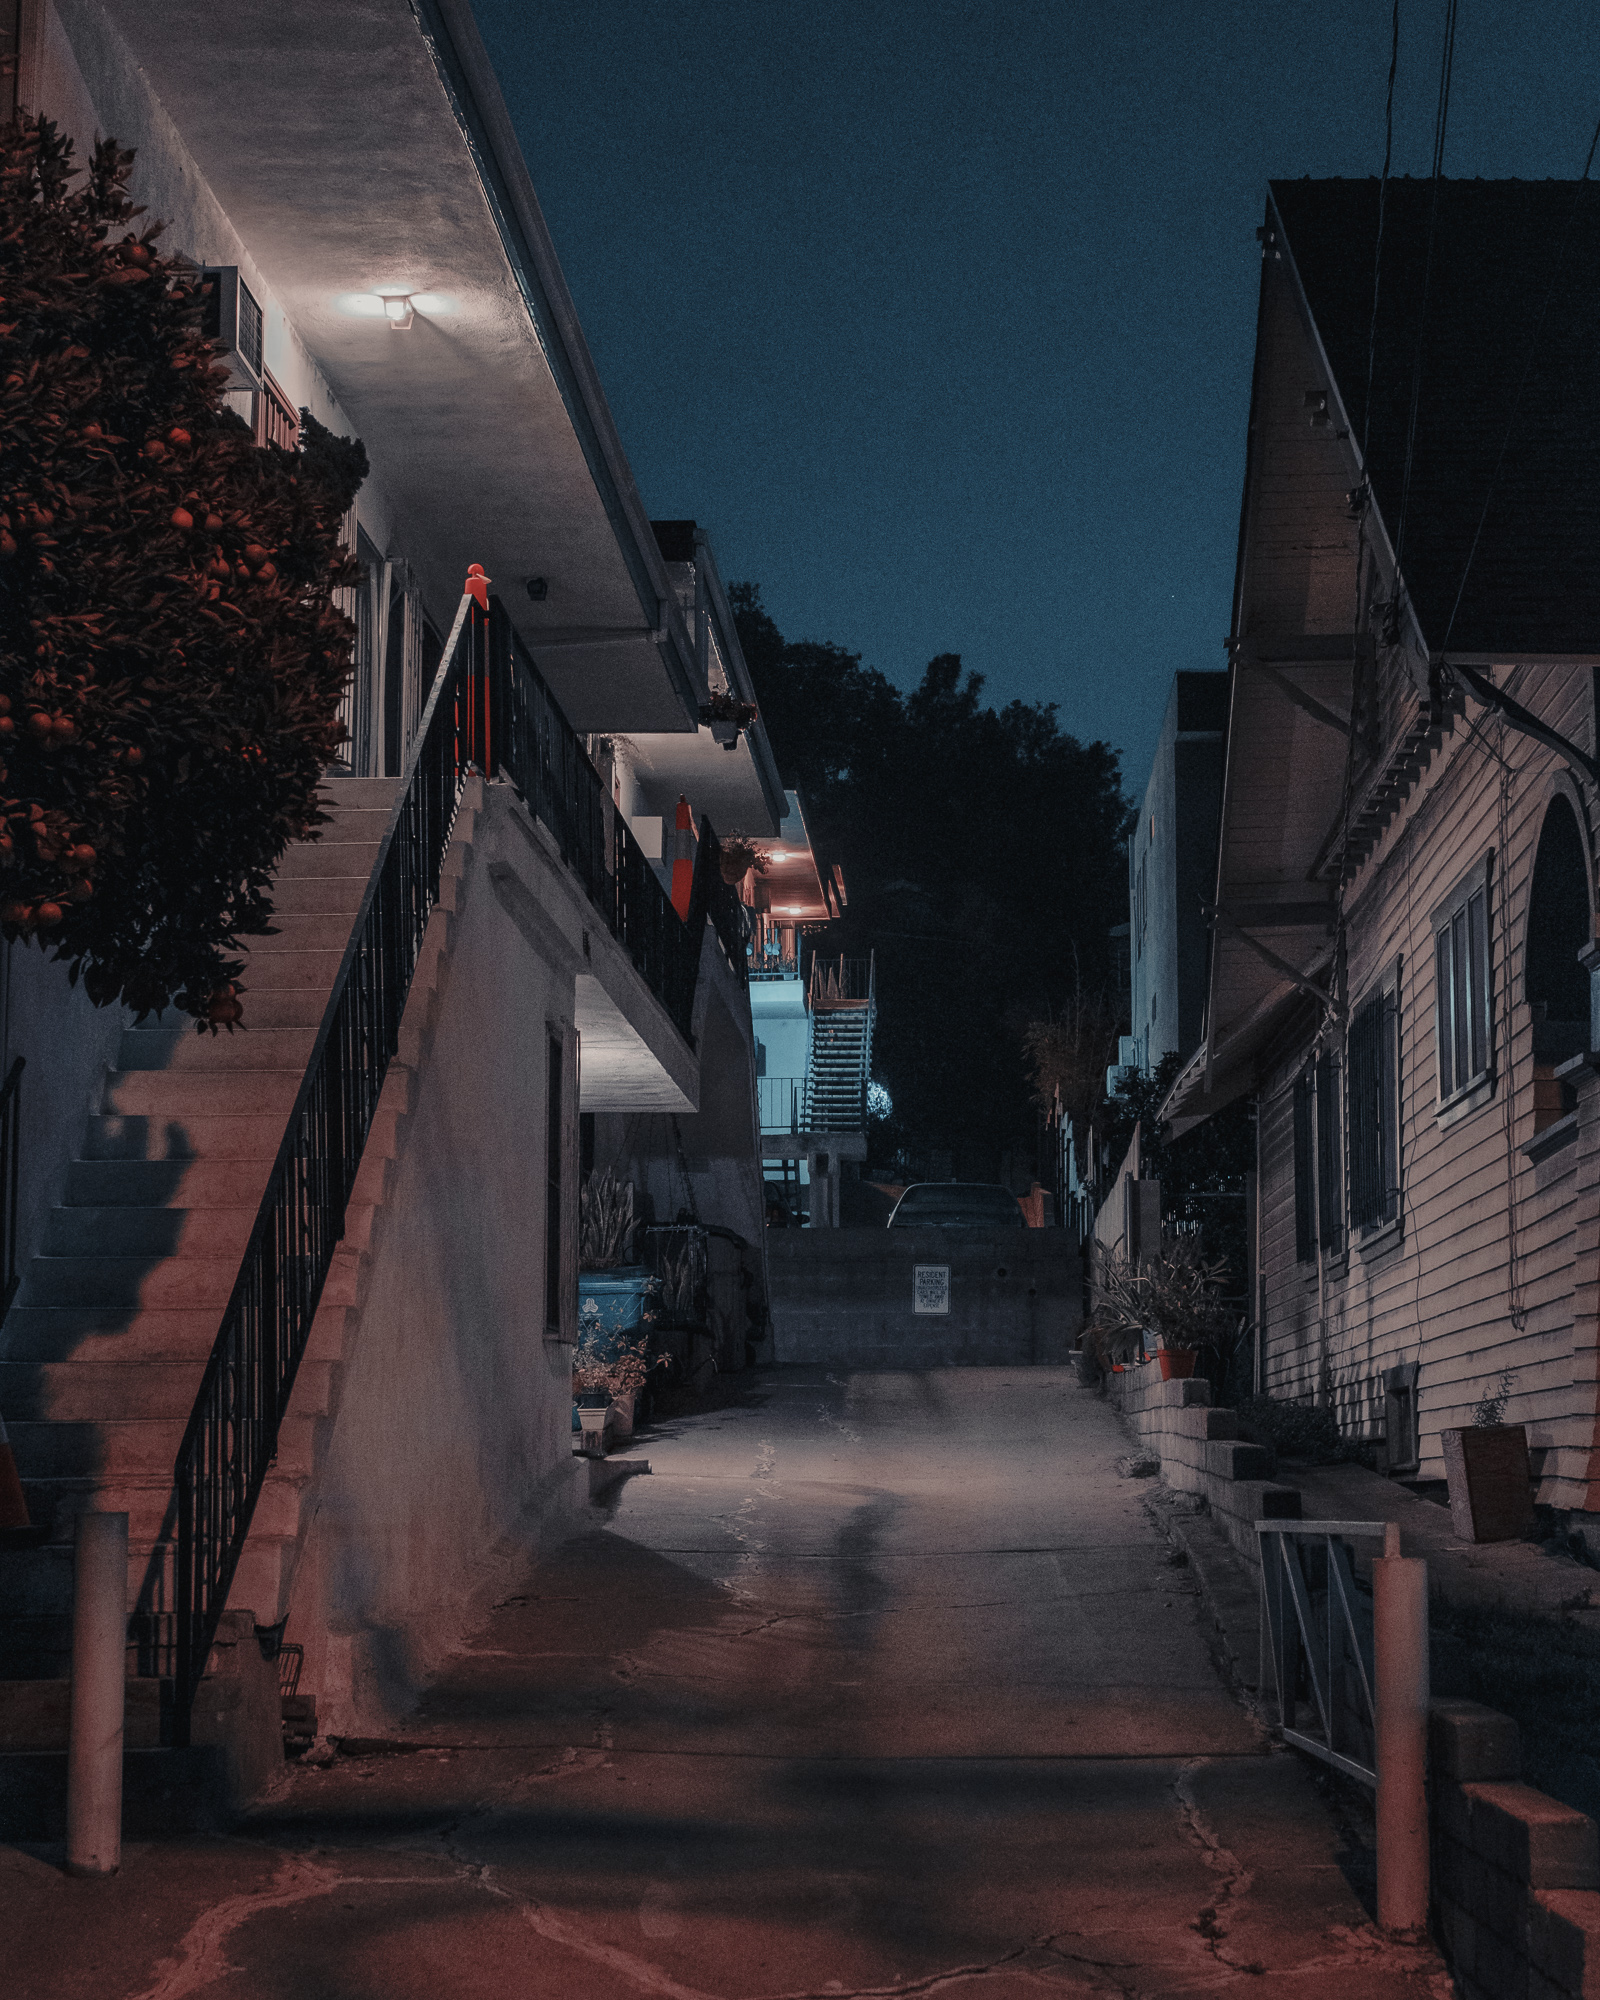 Alley View from Portia to Sutherland, Los Angeles, 2018